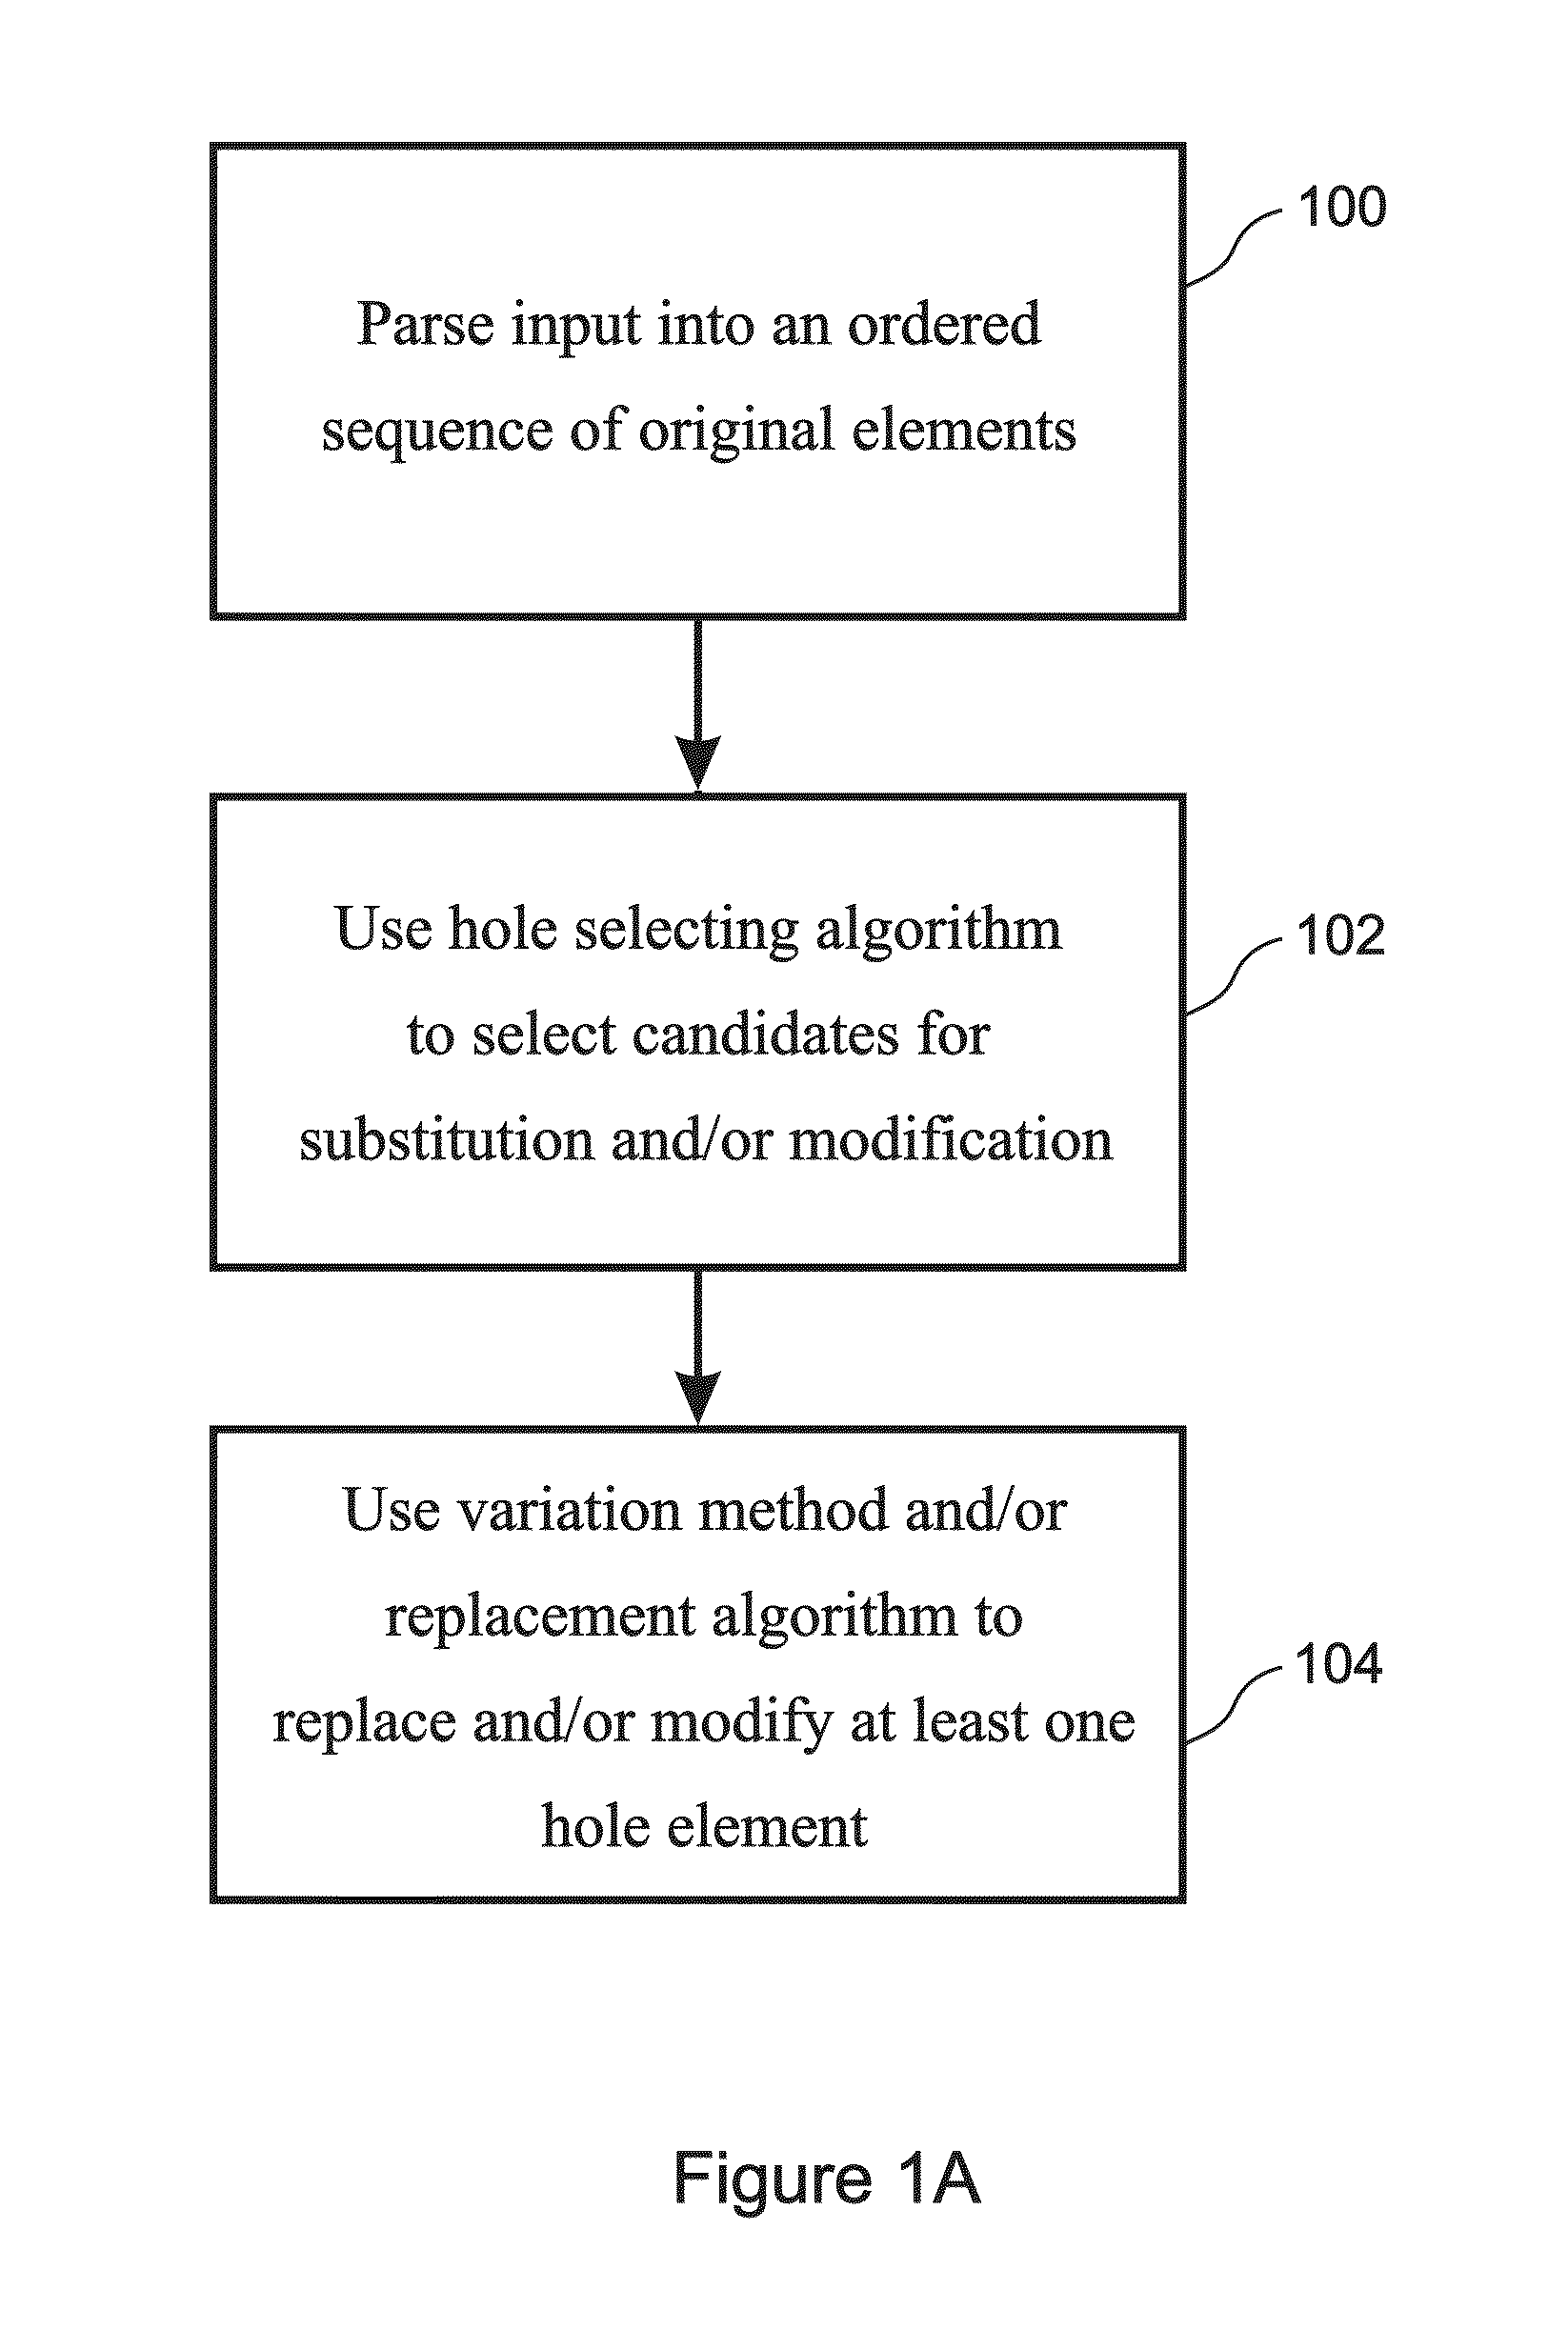 Method and apparatus for computer-aided variation of music and other sequences, including variation by chaotic mapping